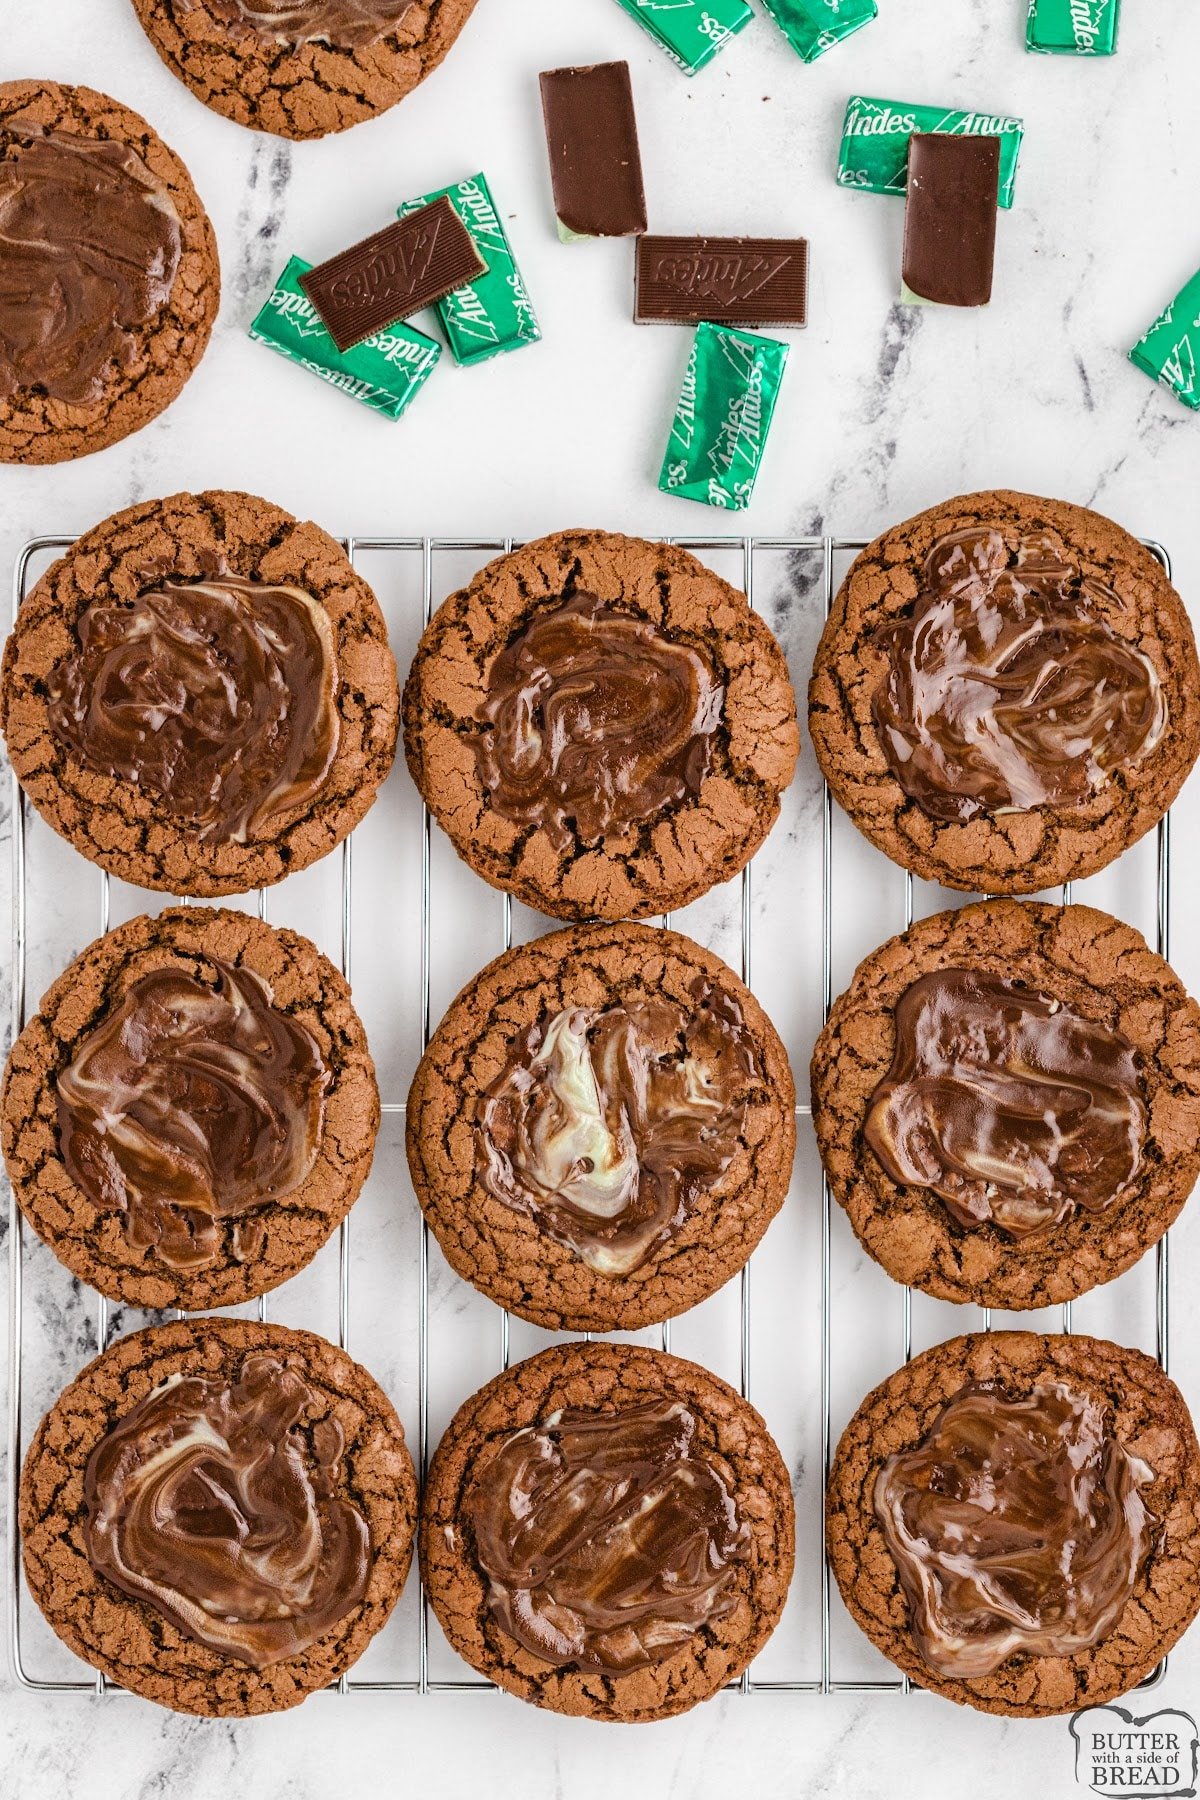 Chocolate mint cookies made with melted Andes mints.